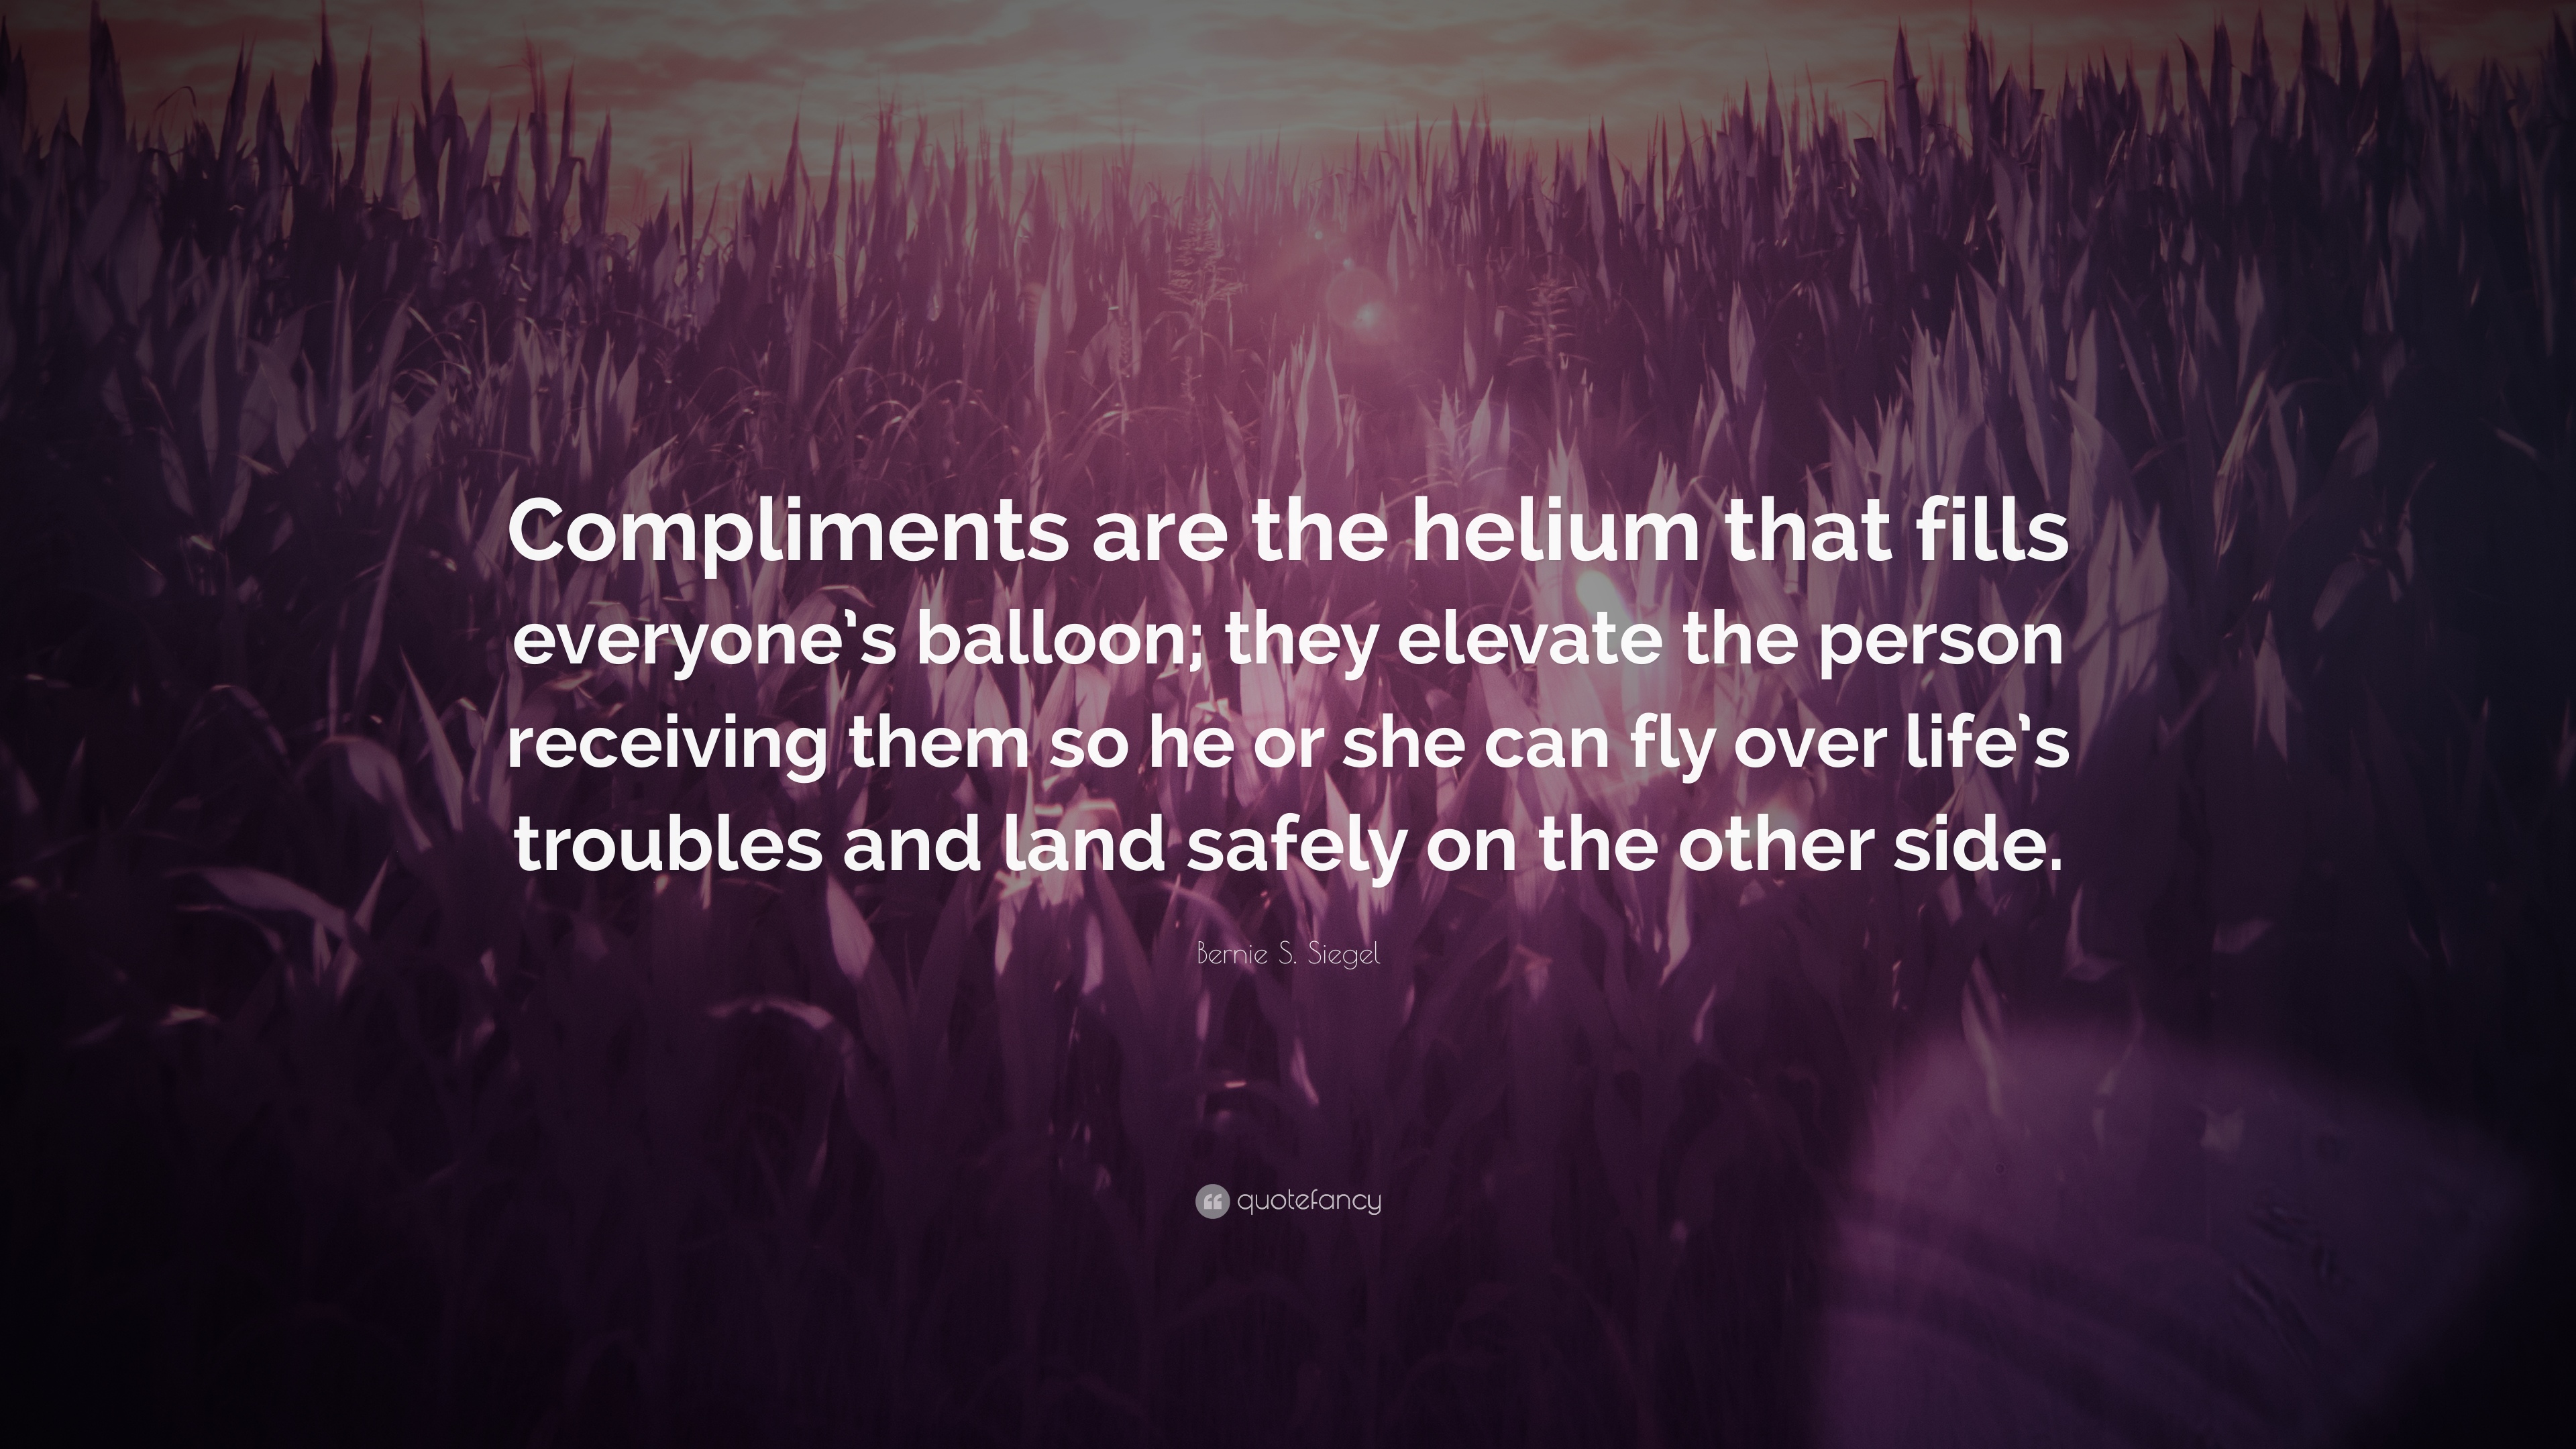 Bernie S. Siegel Quote: “Compliments are the helium that fills